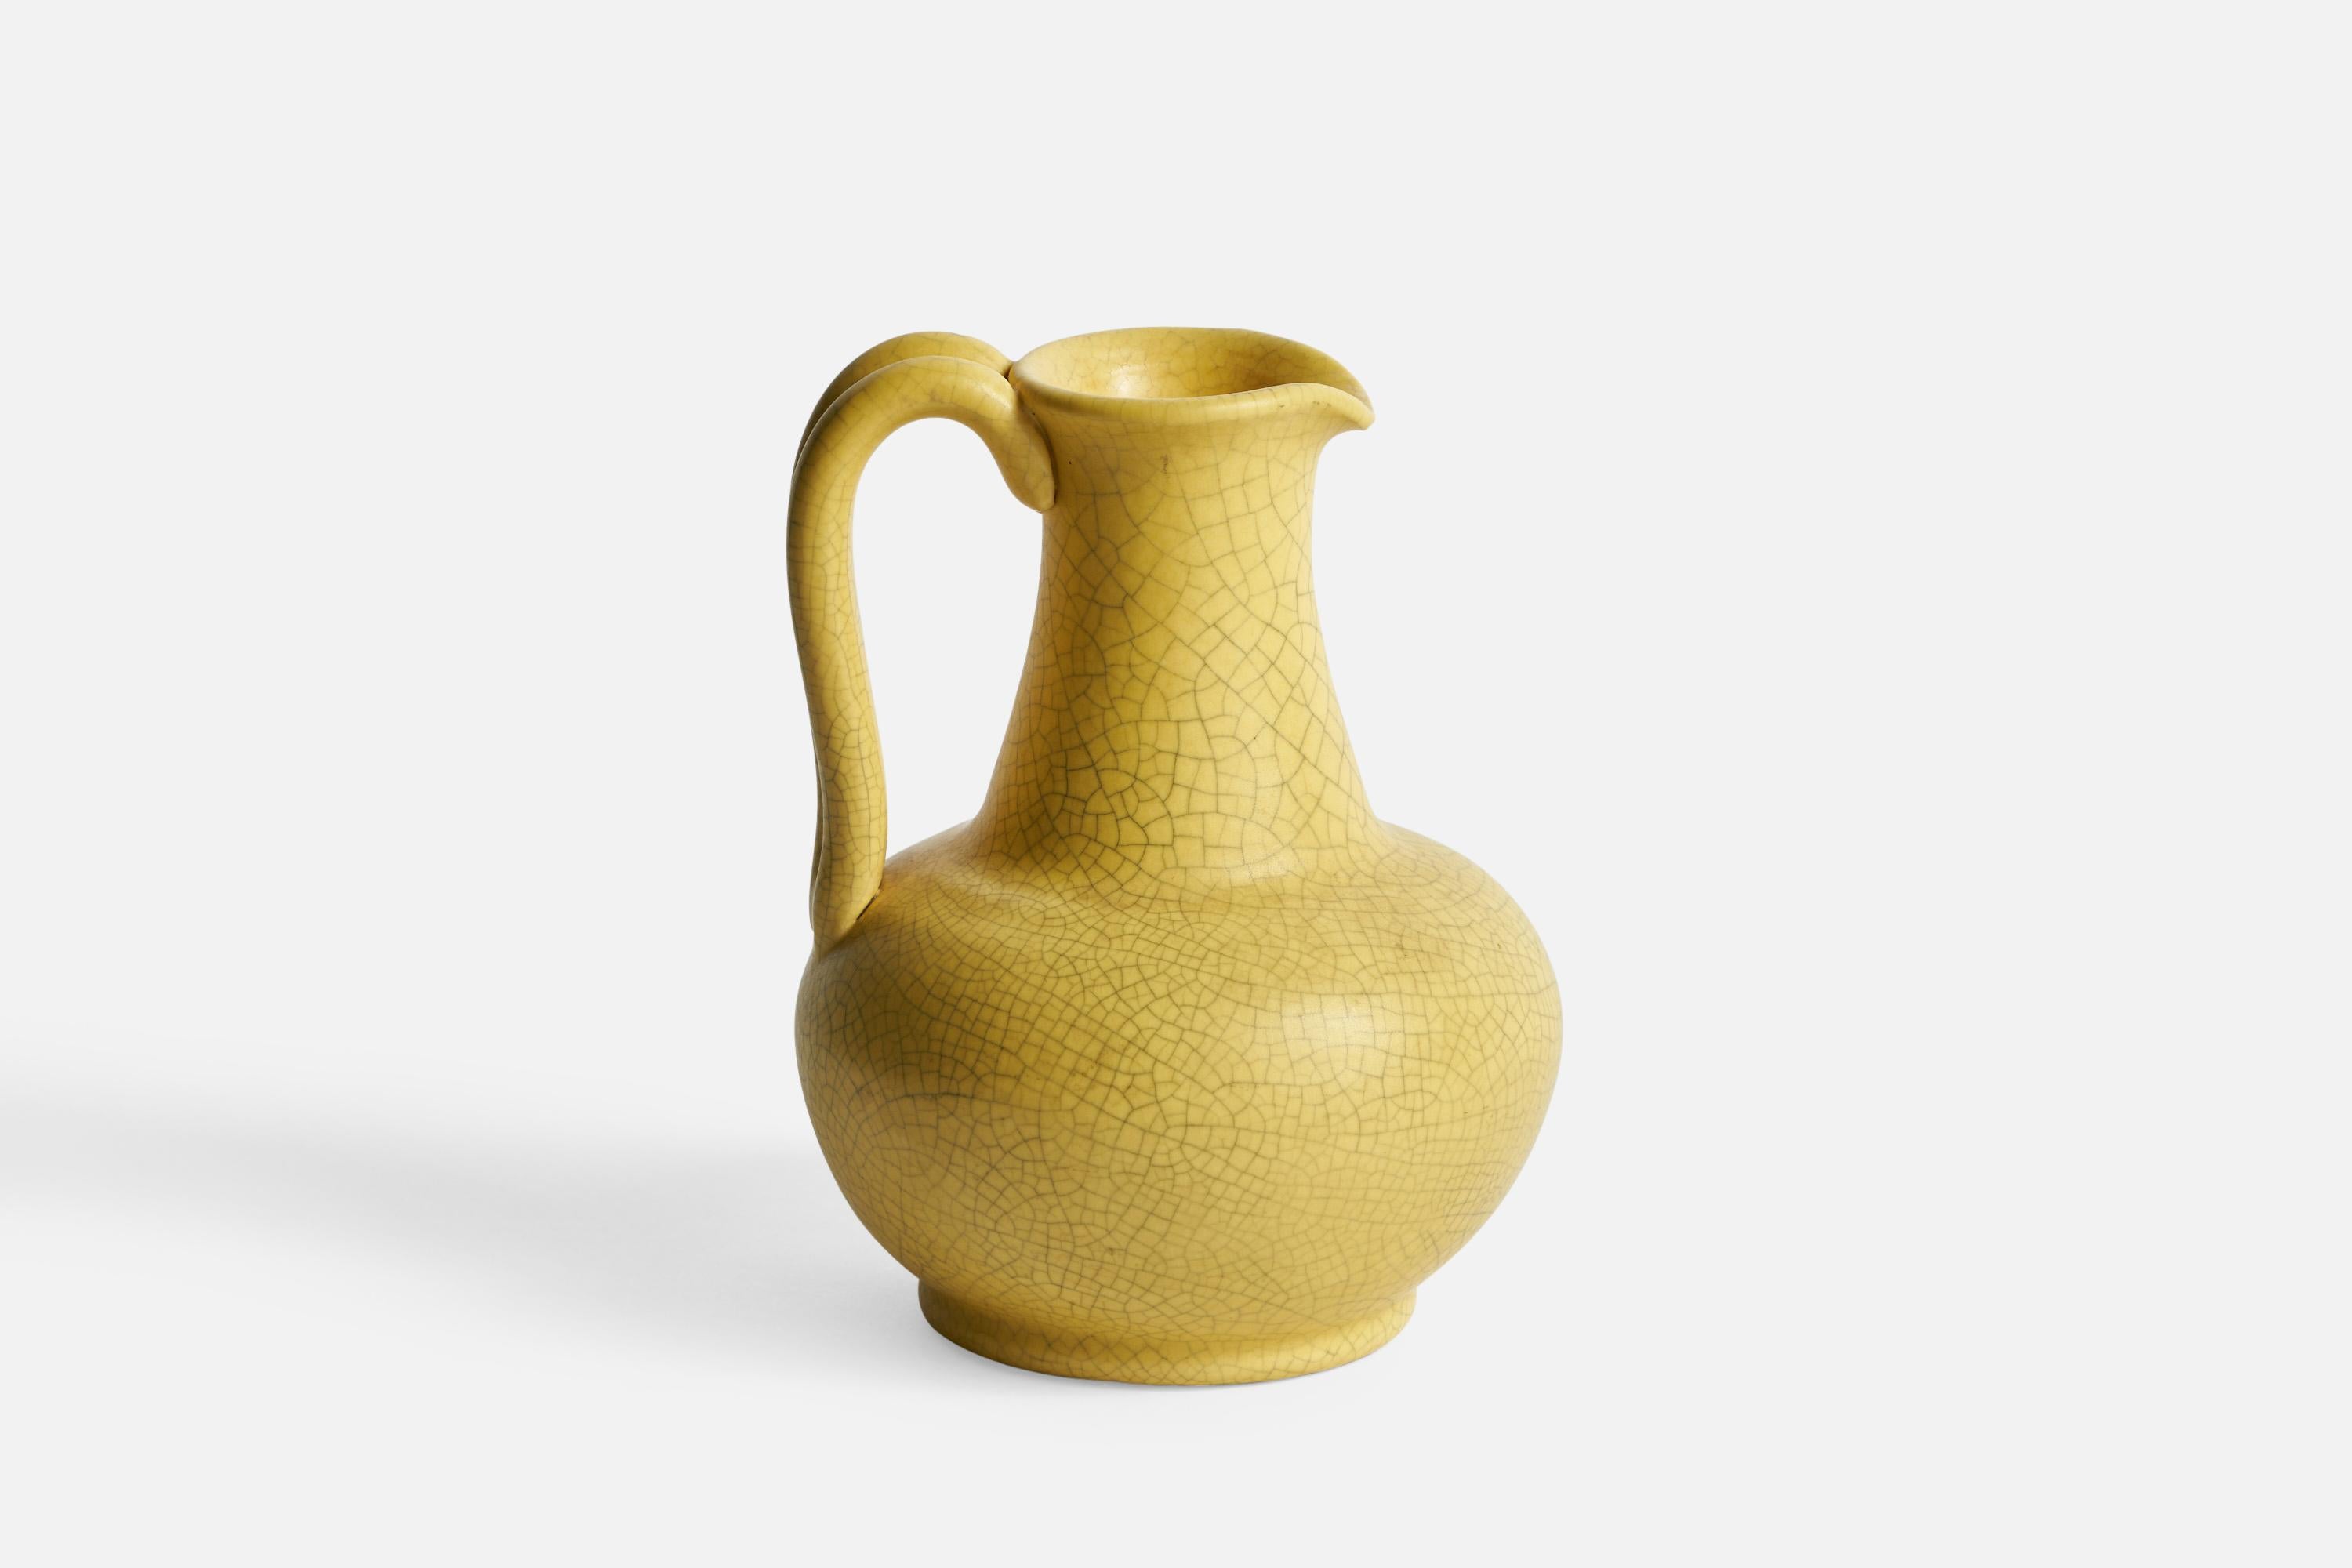 A small yellow-glazed ceramic pitcher designed and produced by Nittsjö, Sweden, 1930s.